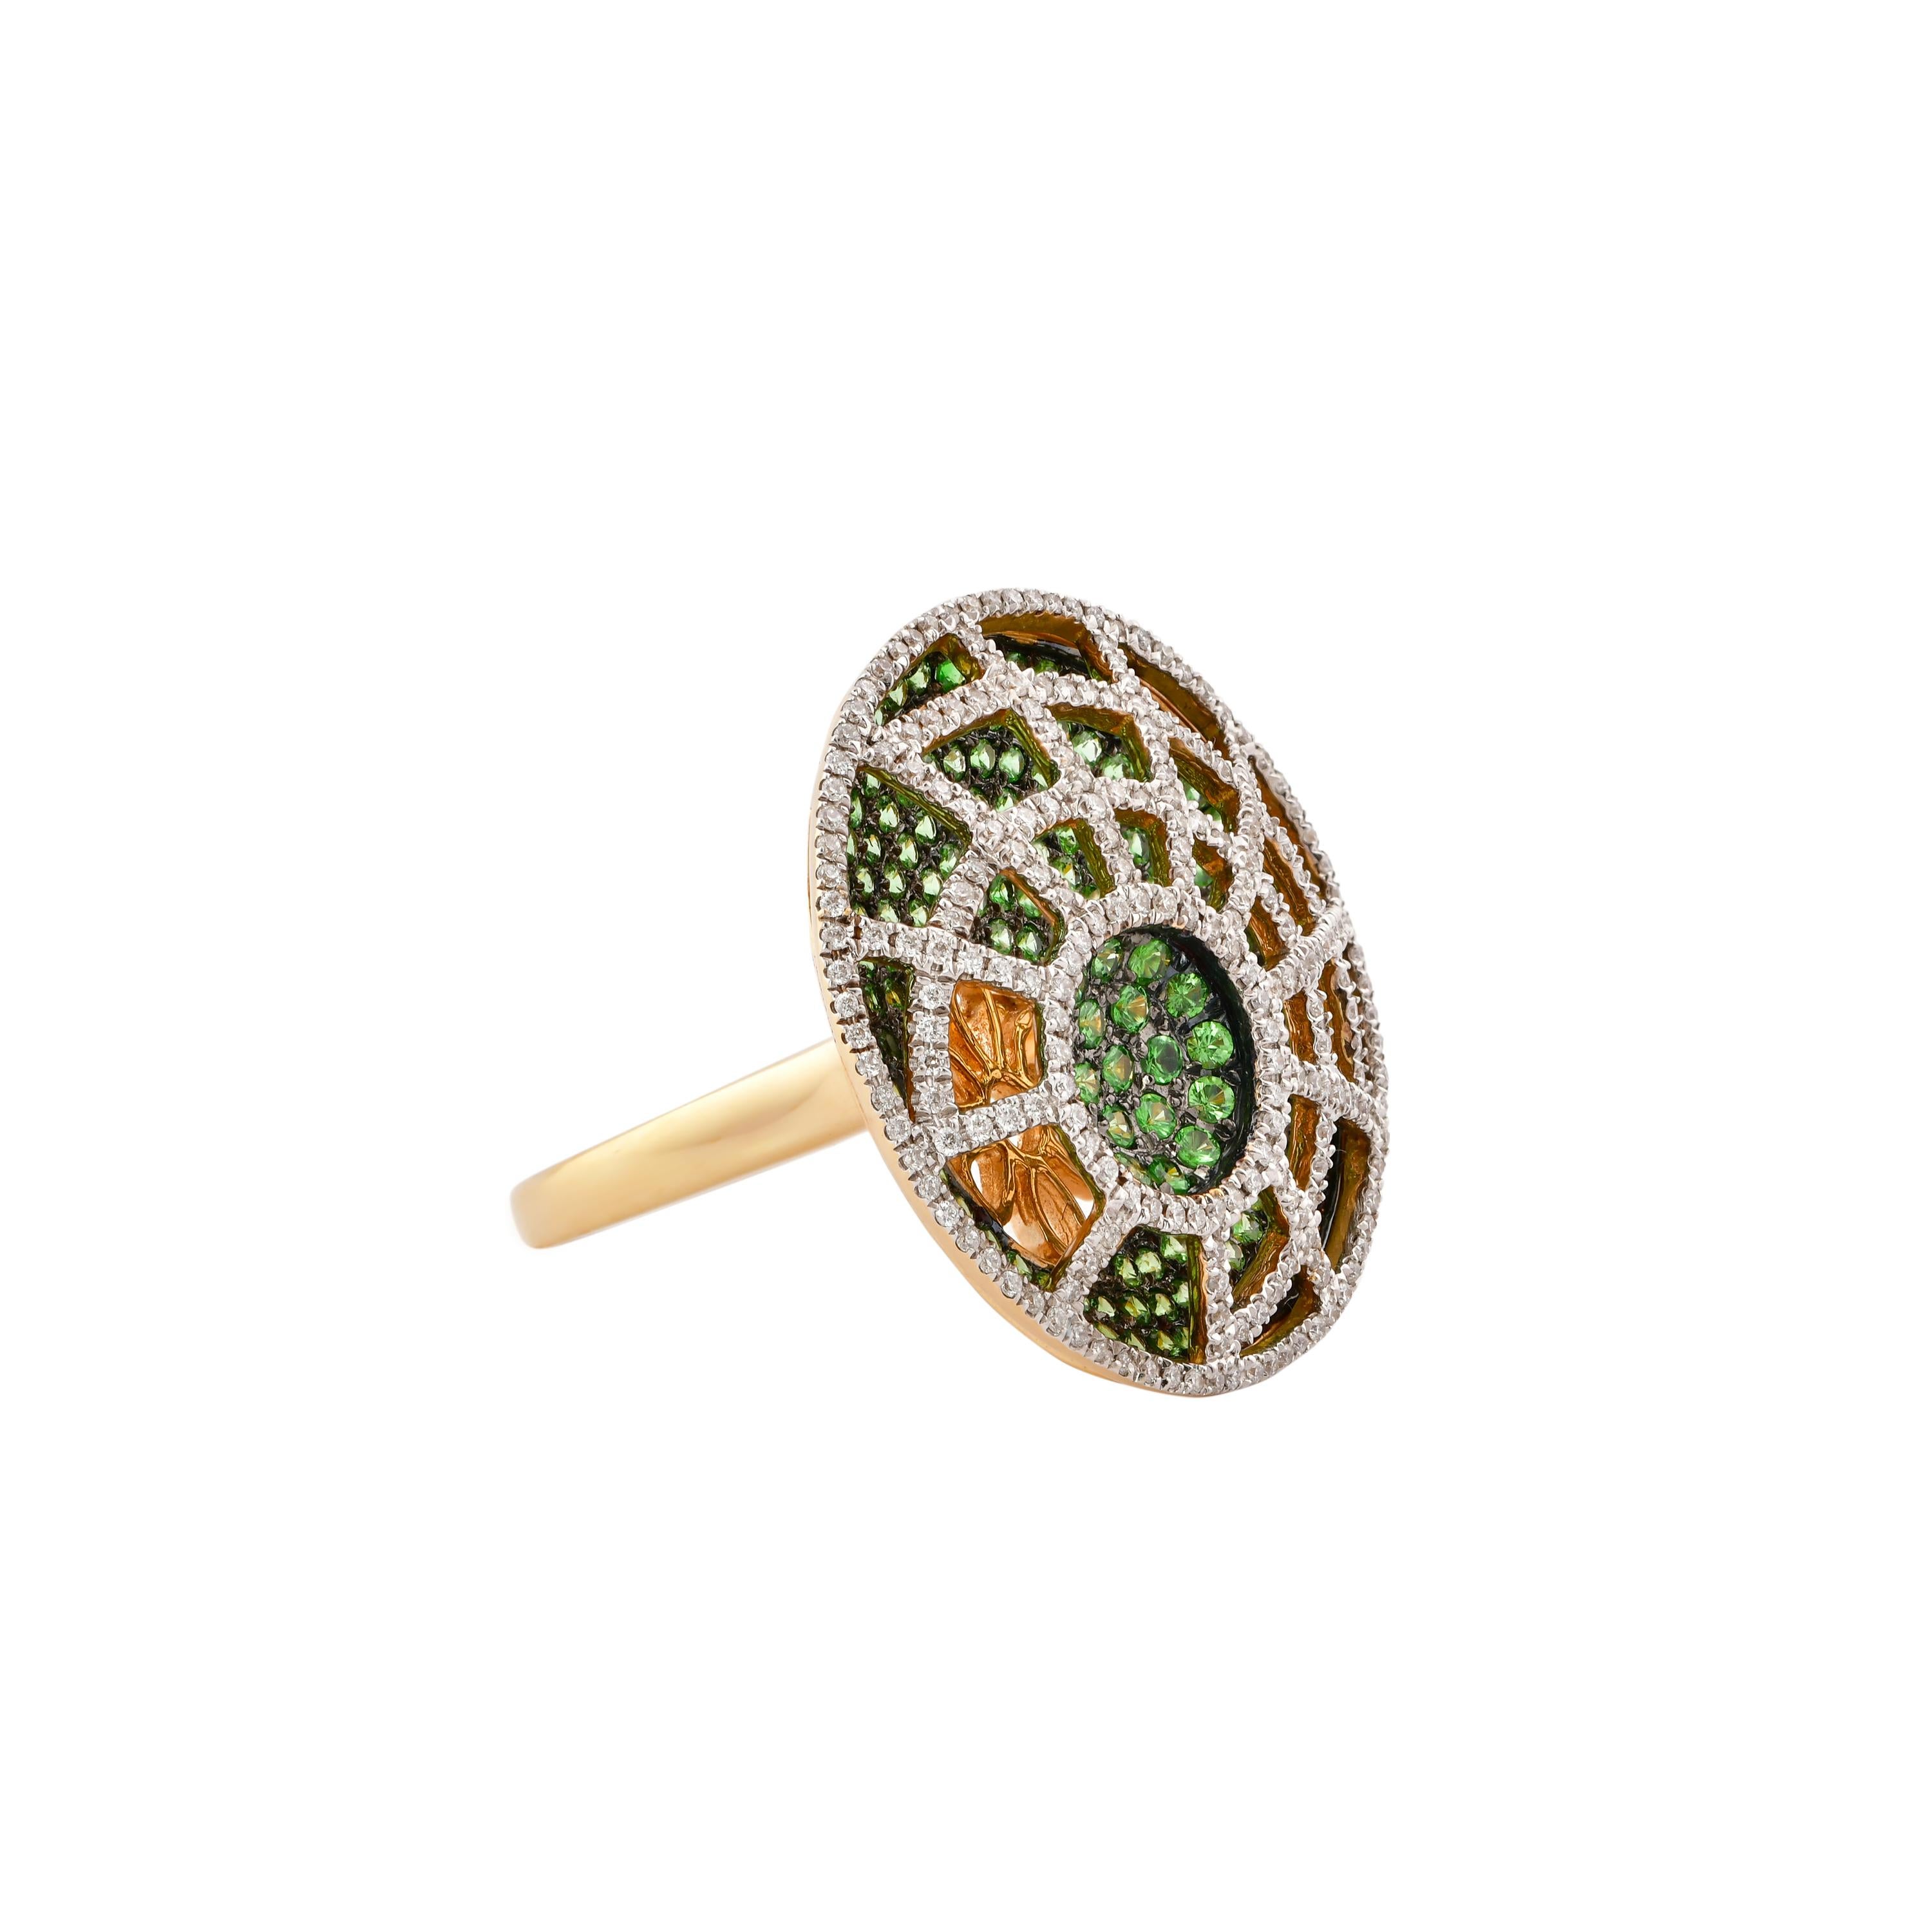 Glamorous Gemstones - Sunita Nahata started off her career as a gemstone trader, and this particular collection reflects her love for multi-colored semi-precious gemstones. This ring presents a cluster of tsavorite garnets set on top of a backdrop